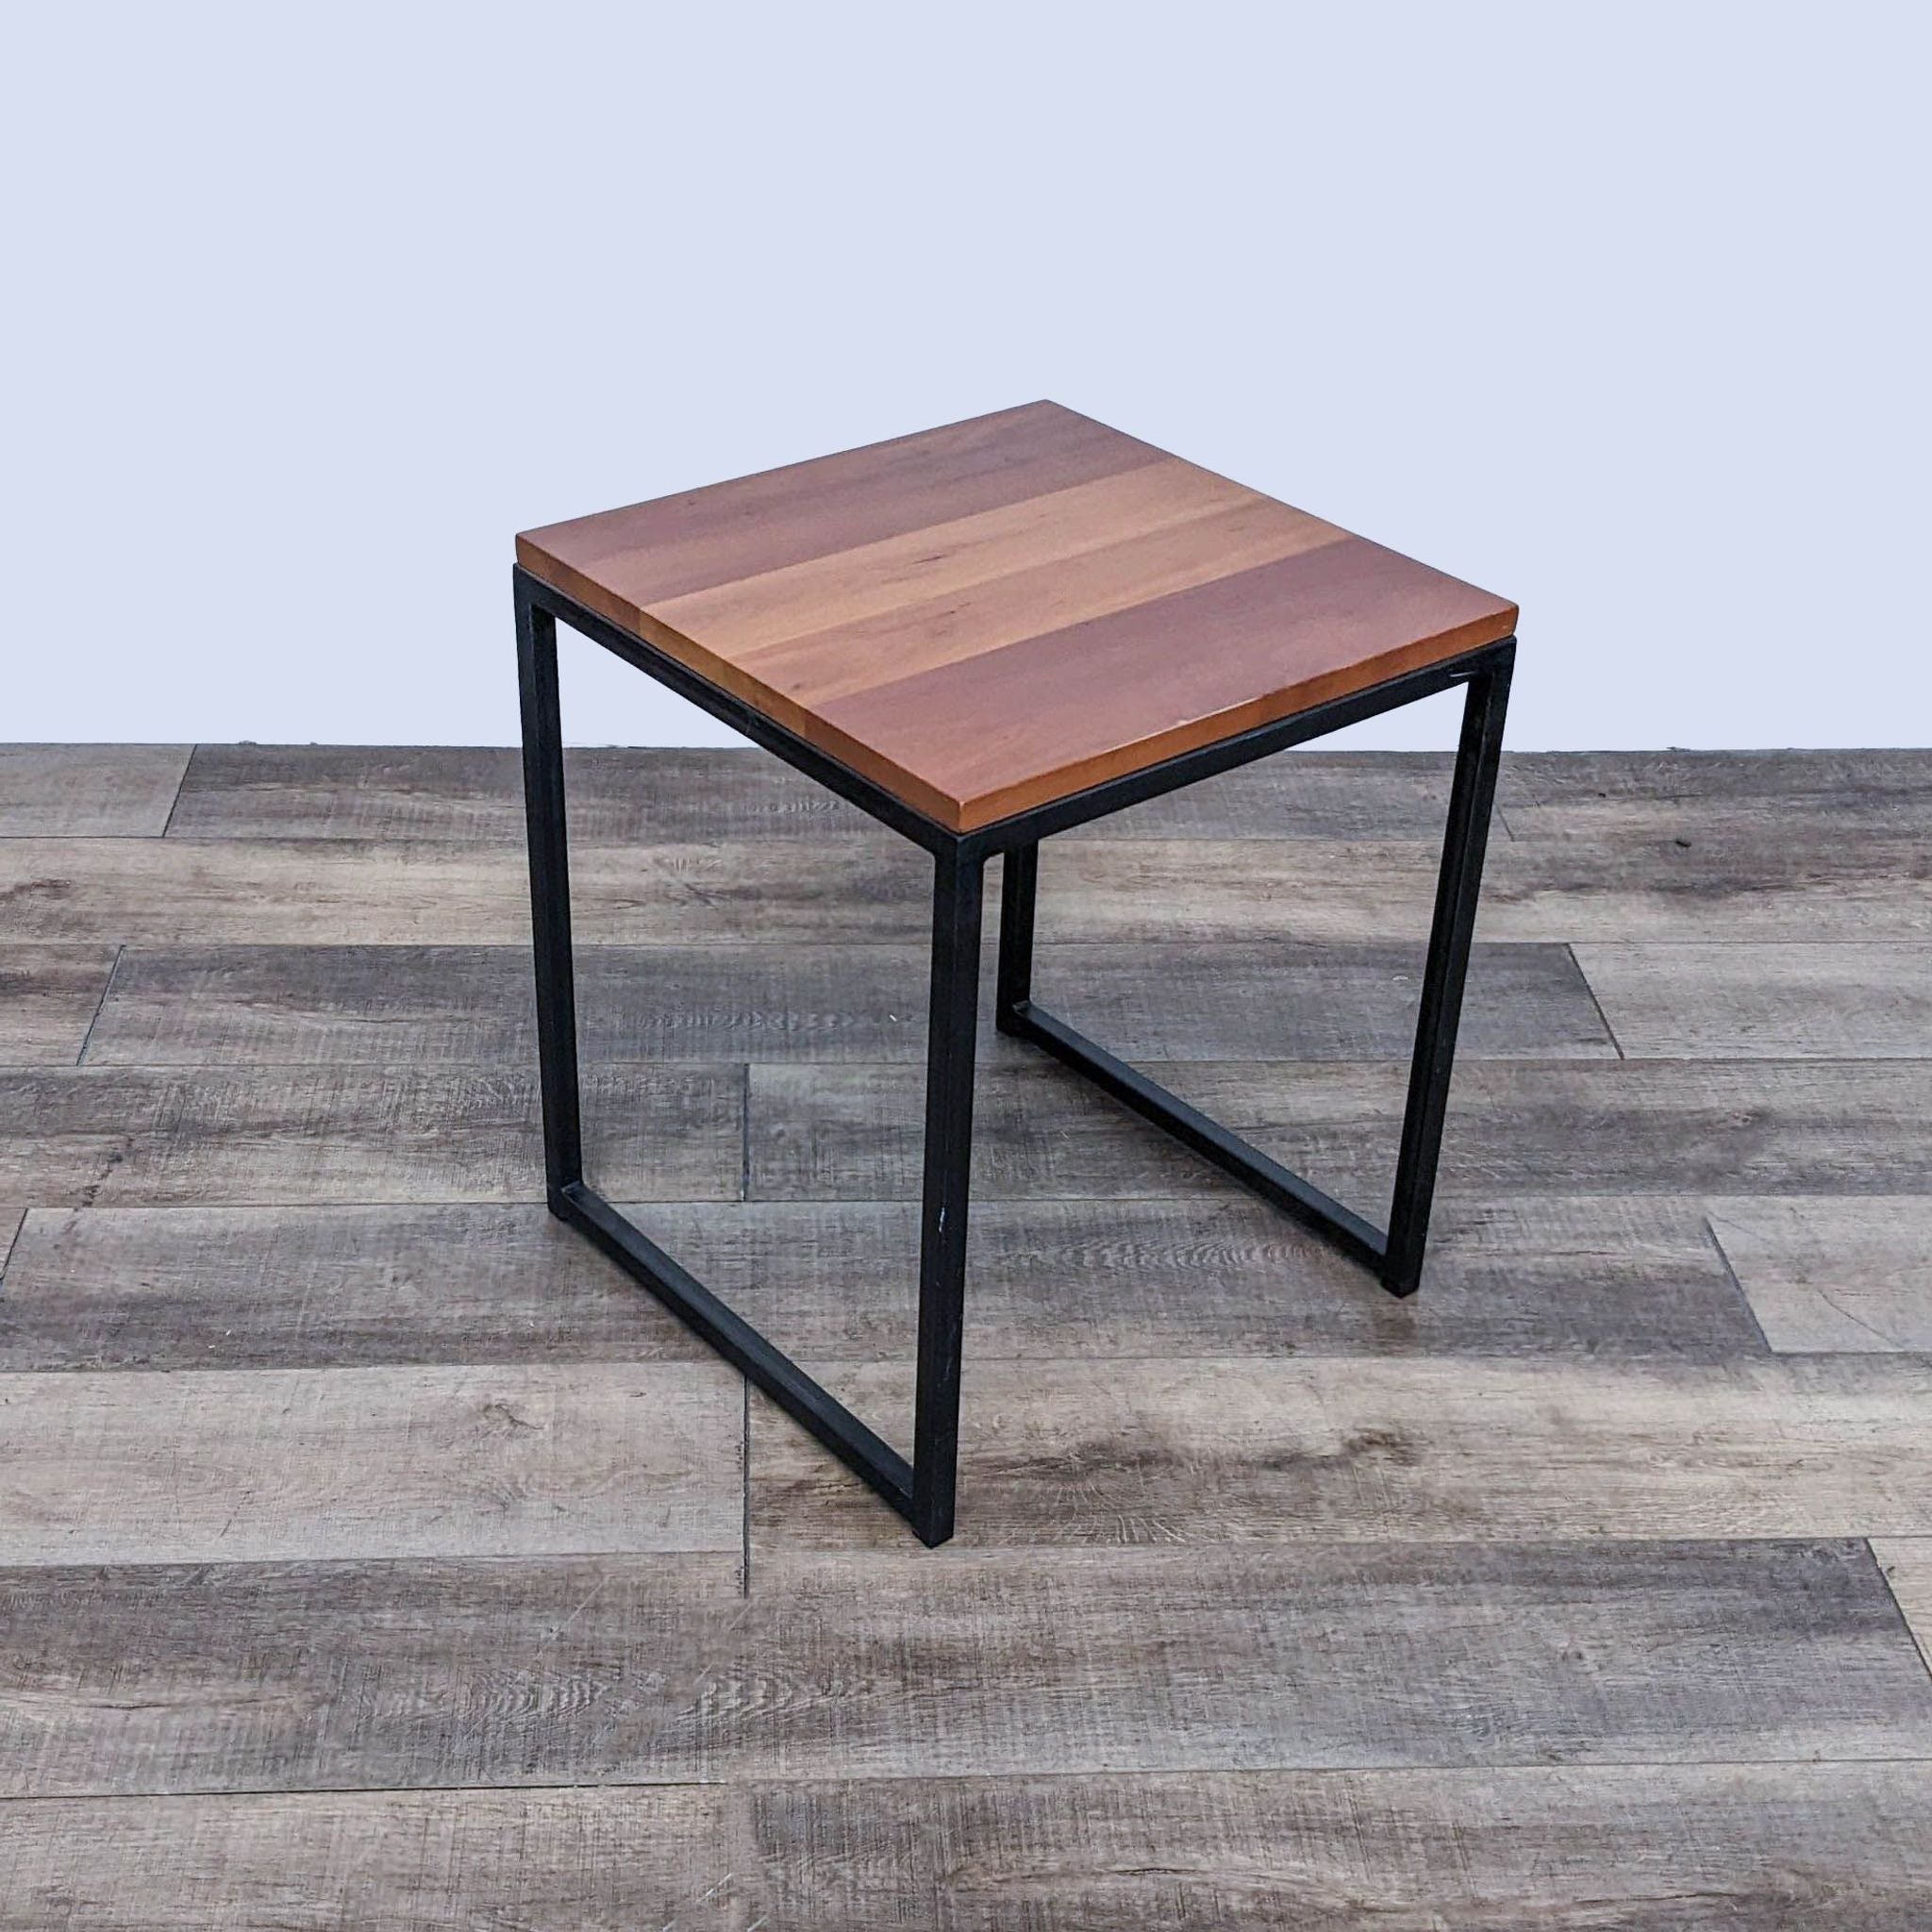 Reperch brand end table with a wooden top and a sturdy metal base, on a wood-patterned floor.